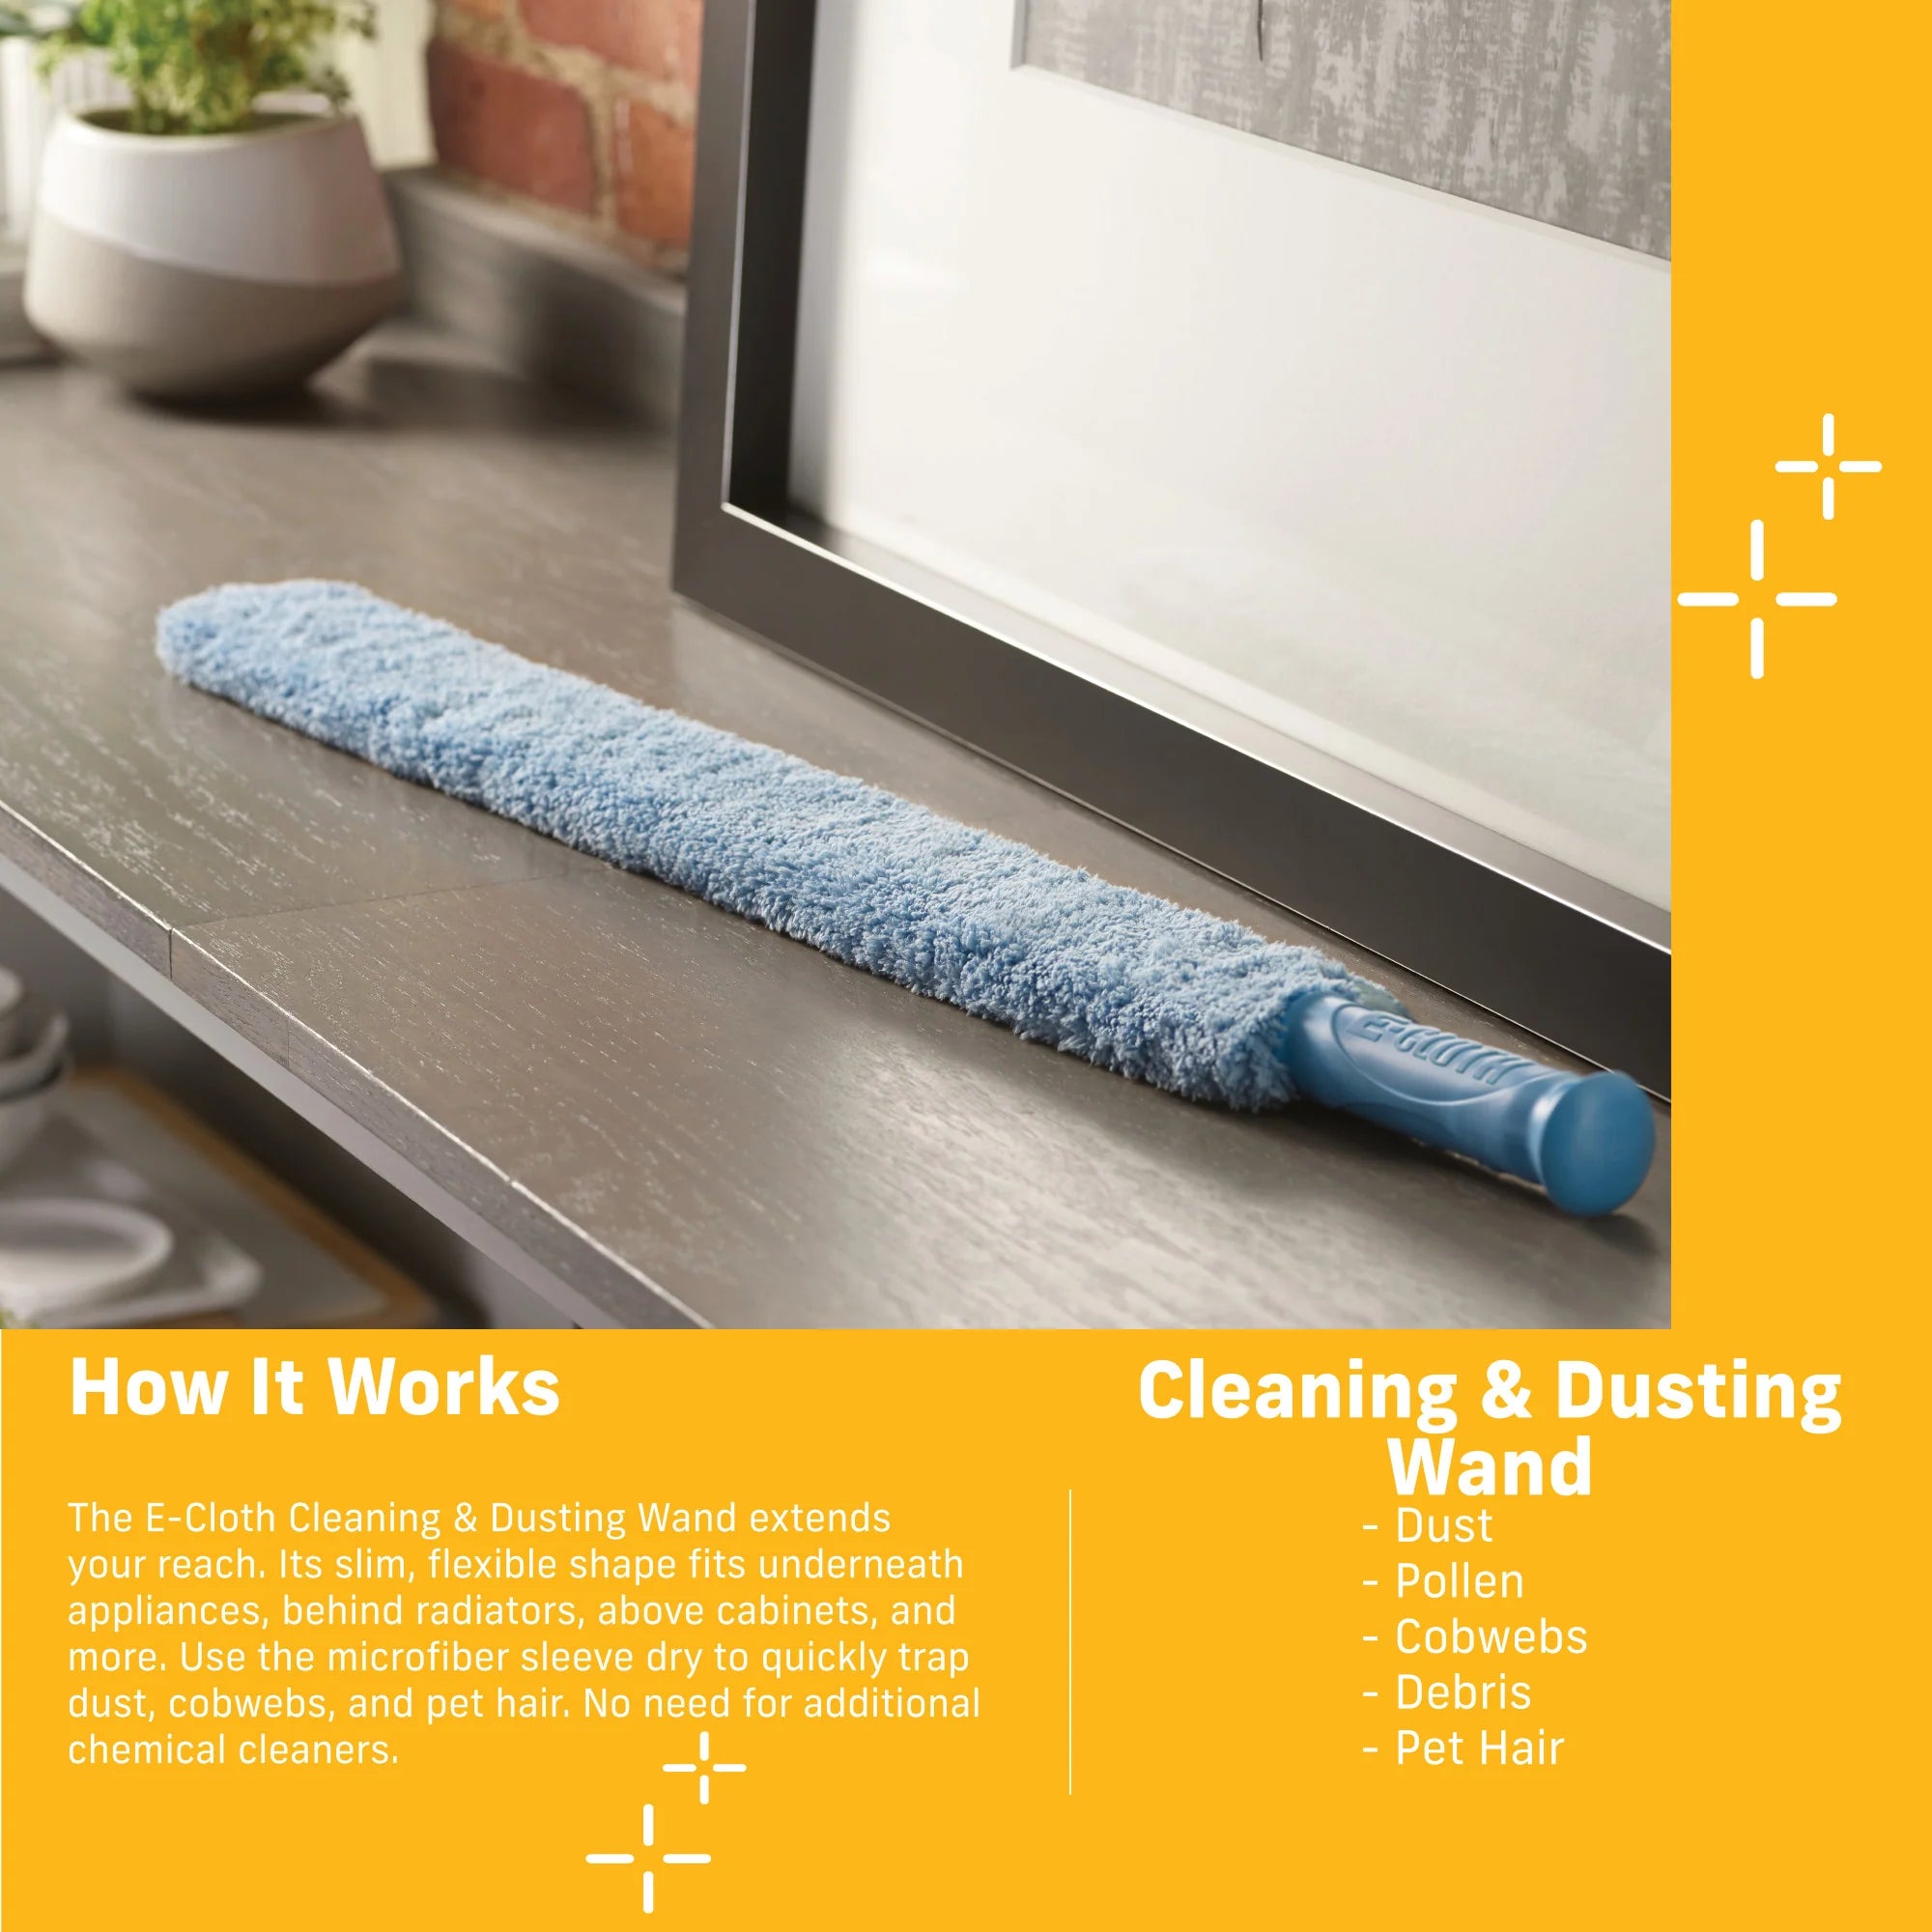 Cleaning & Dusting Wand